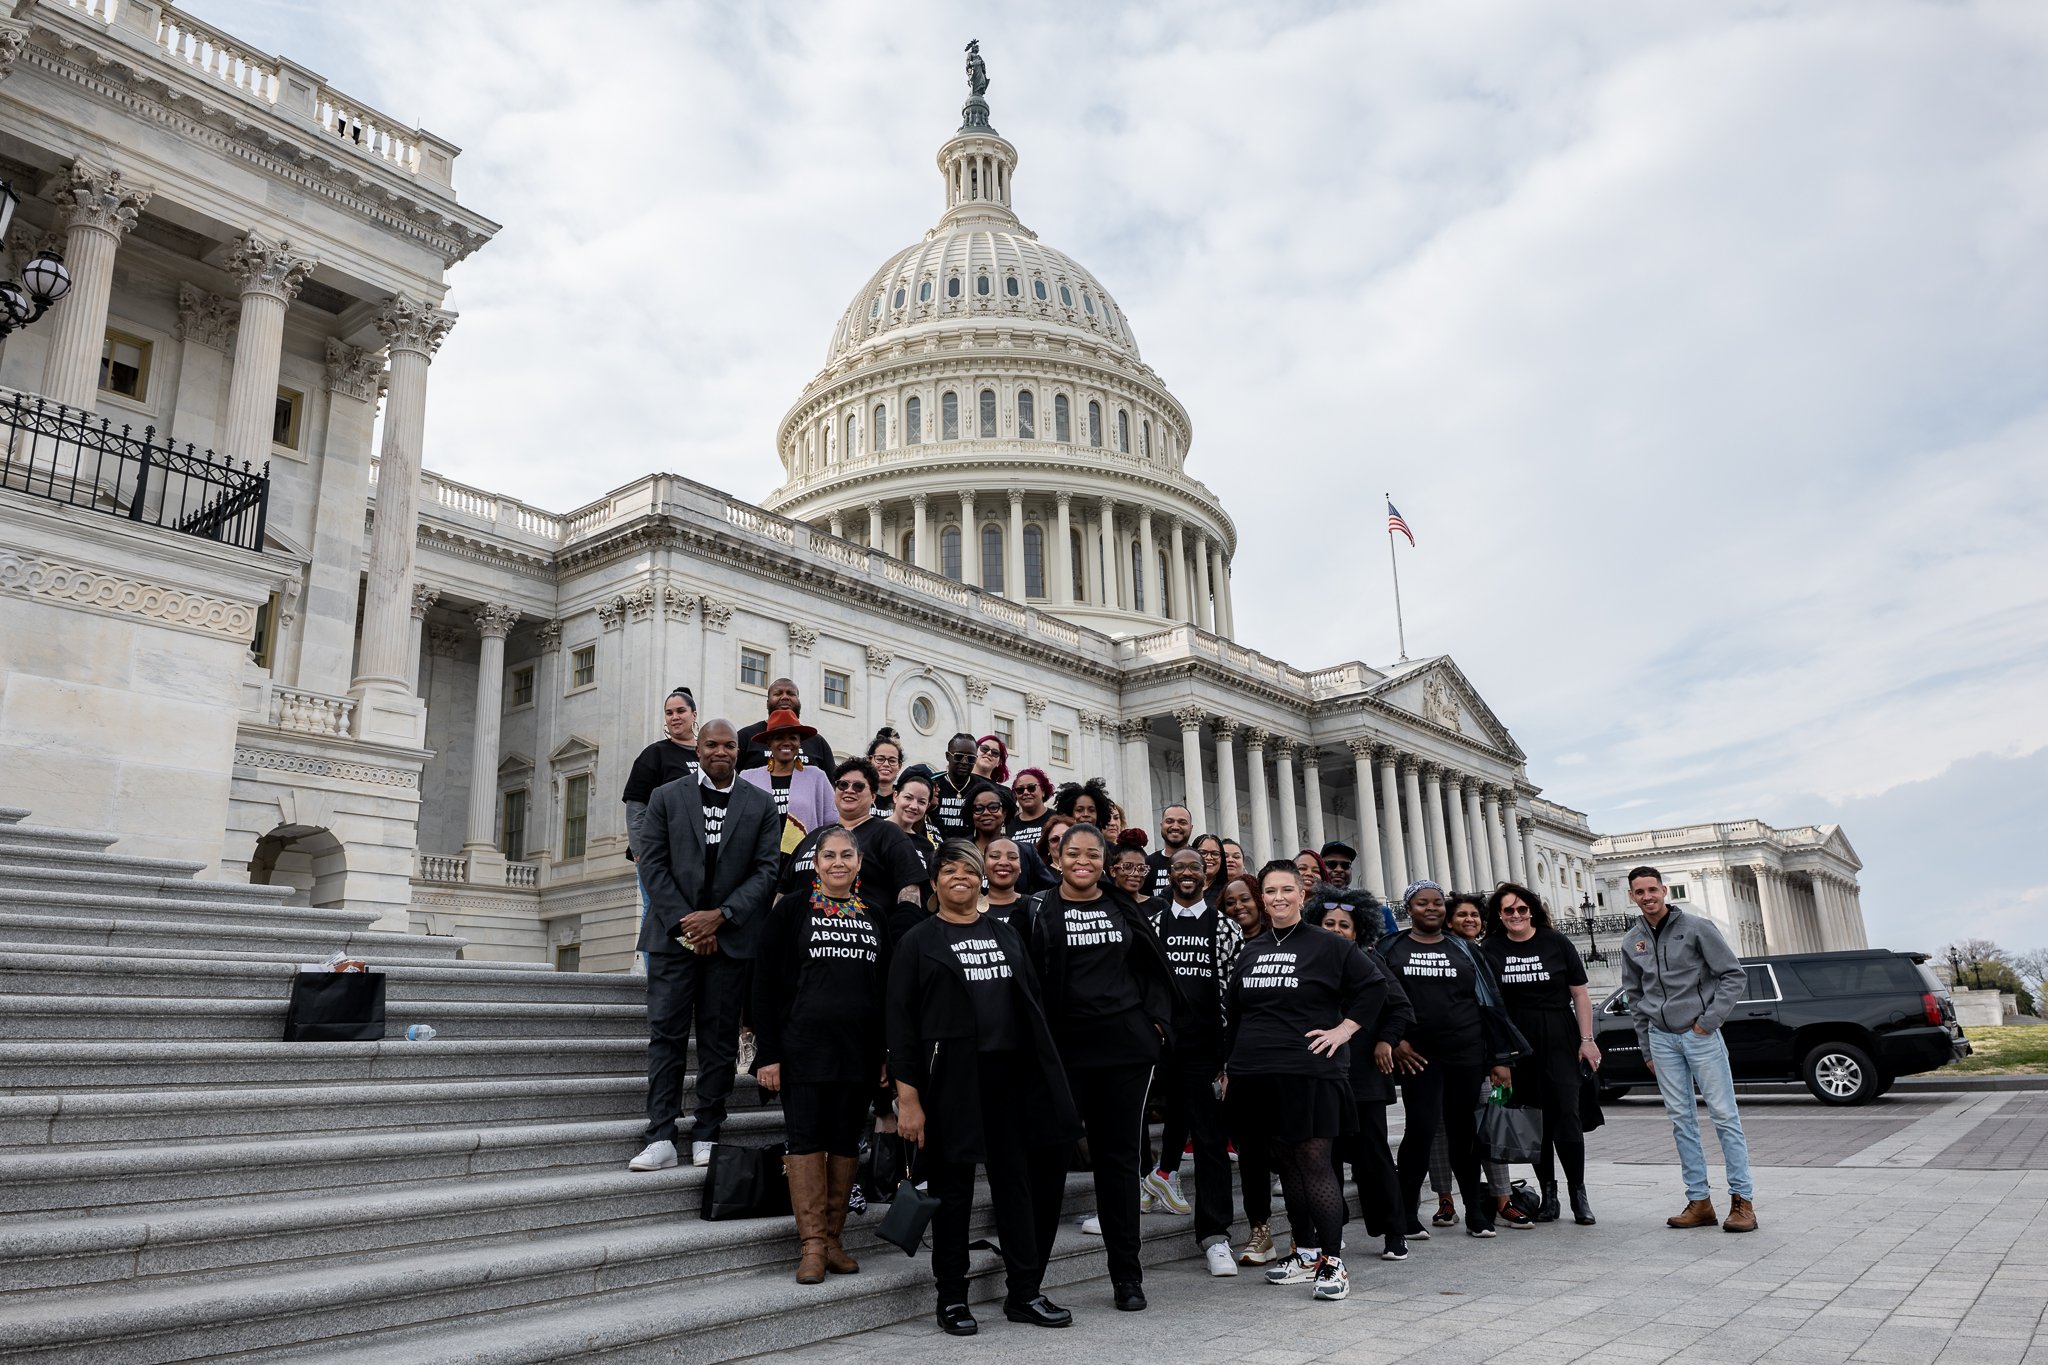 Members of the National Parents Union stand on the steps of the Capitol building in Washington, D.C.